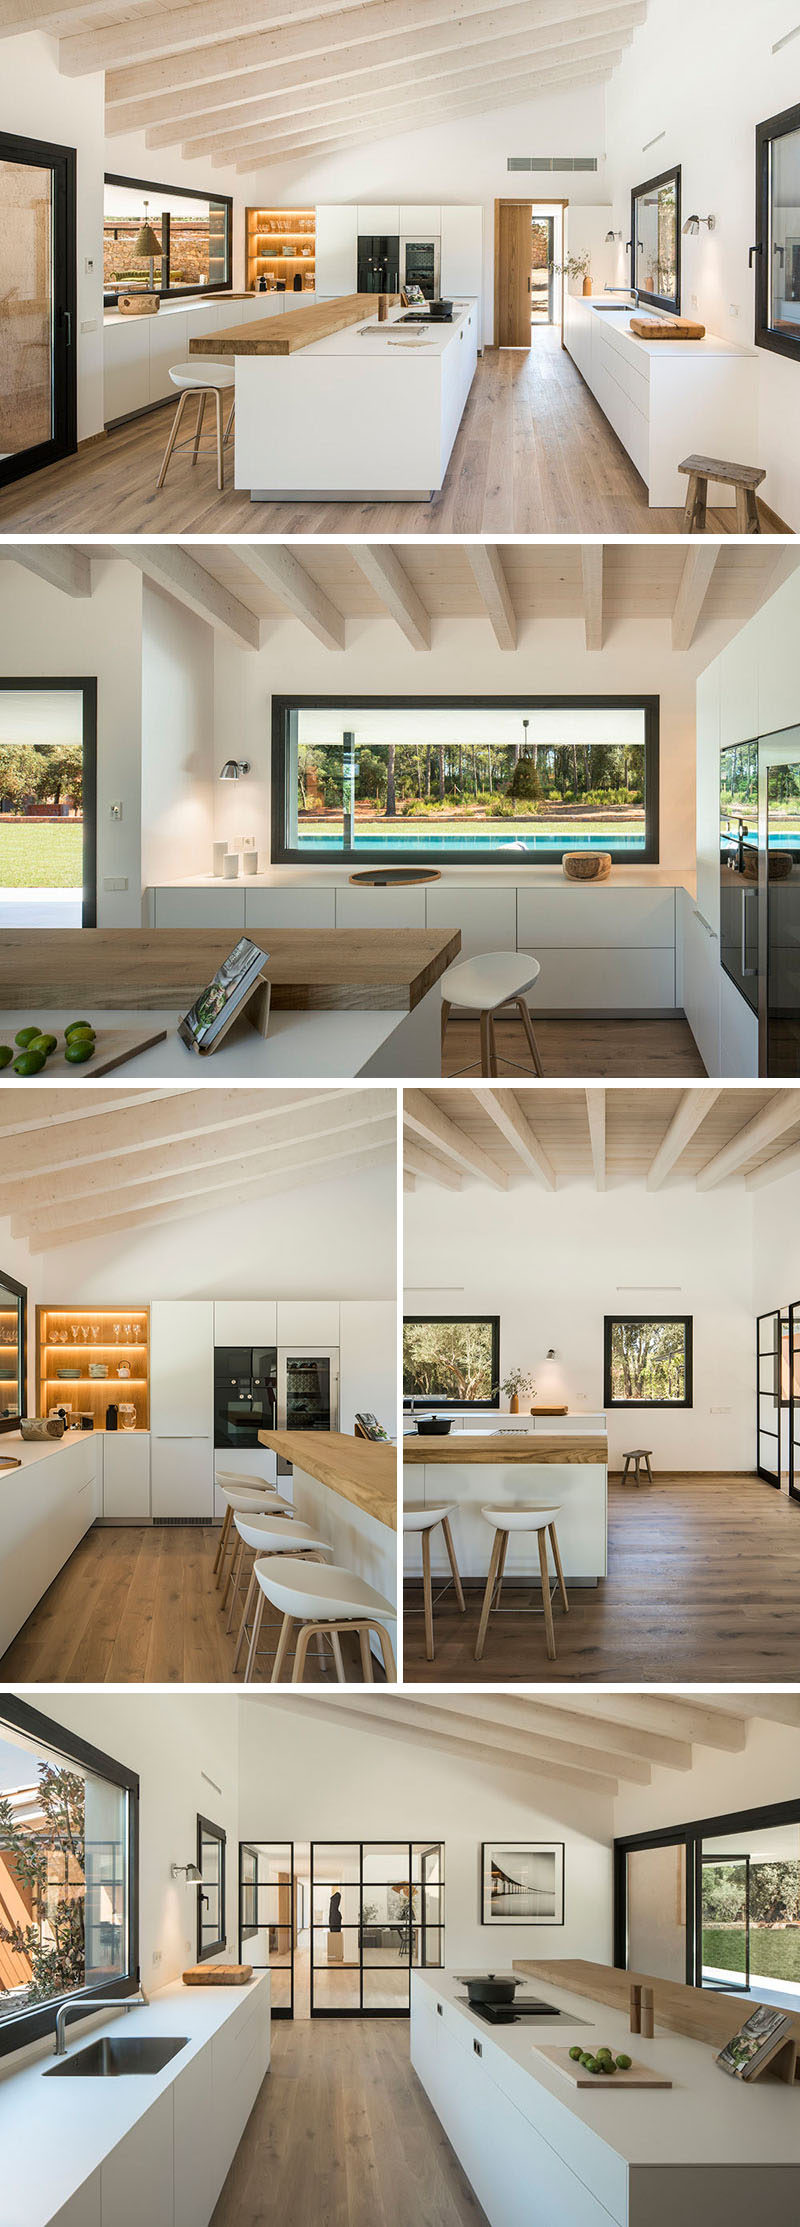 In the kitchen, a sloped ceiling creates a feeling of space, while the kitchen has been split up into three different work areas with a long wood bar top and island positioned in the middle. Throughout the kitchen, white minimalist cabinets are the main storage elements, while exposed wood shelving with back-lighting highlights a few favorite items. #KitchenDesign #ModernKitchen #KitchenLayout